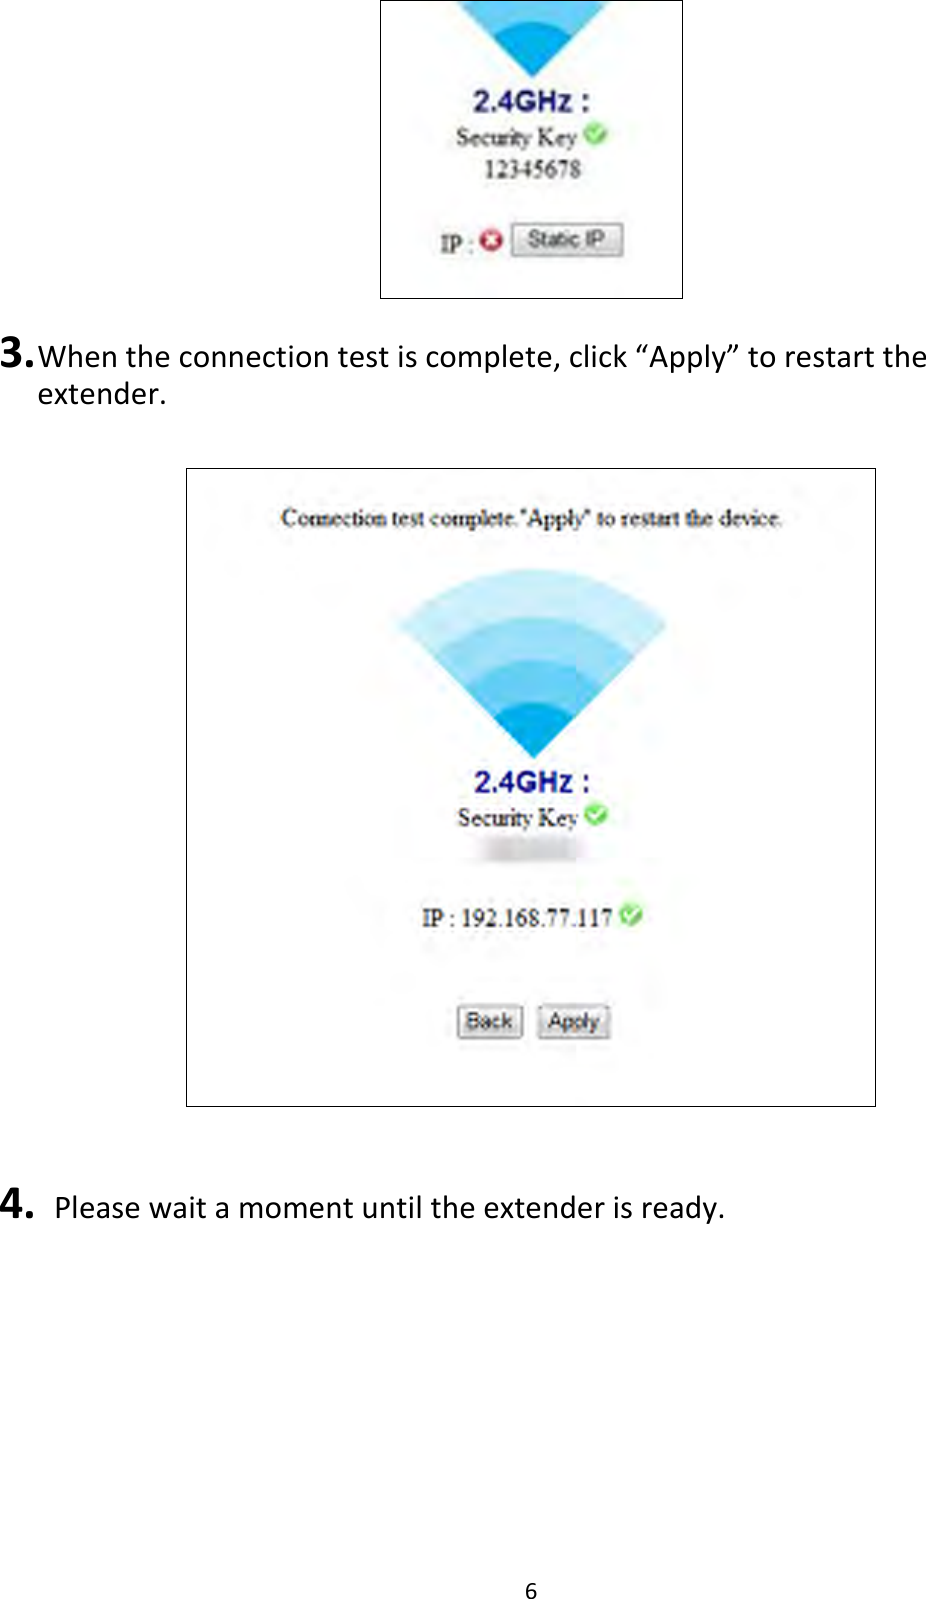 6   3. When the connection test is complete, click “Apply” to restart the extender.    4.   Please wait a moment until the extender is ready.  